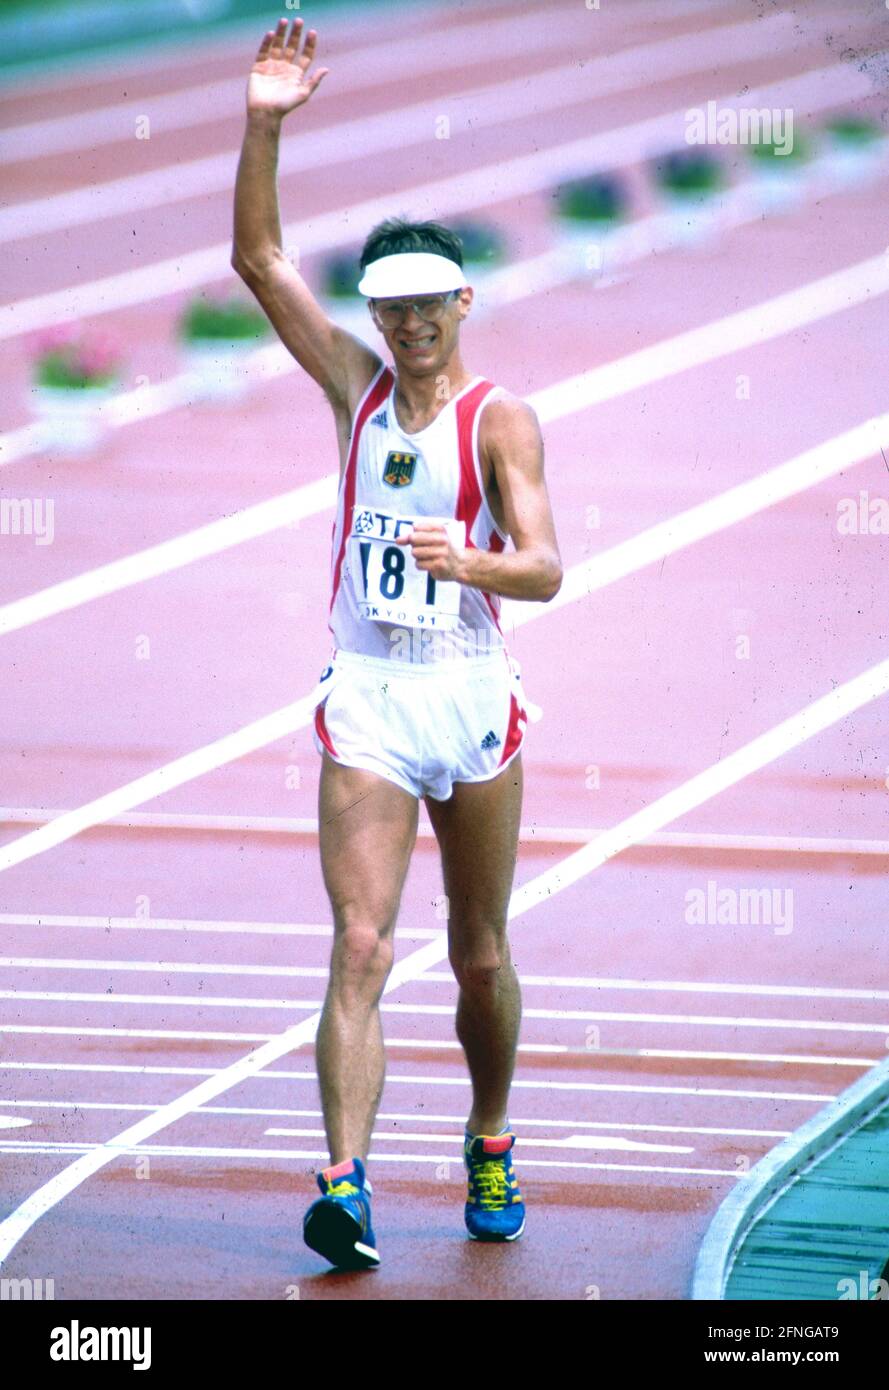 Former walker Hartwig GAUDER has died at the age of 65. Archive photo: Athletics: Hartwig Gauder , Germany, Olympic walker champion 1980, here at the 1991 World Championships in Athletics in Tokyo, where he finished third (3rd) on 31/08/1991. [automated translation] Stock Photo